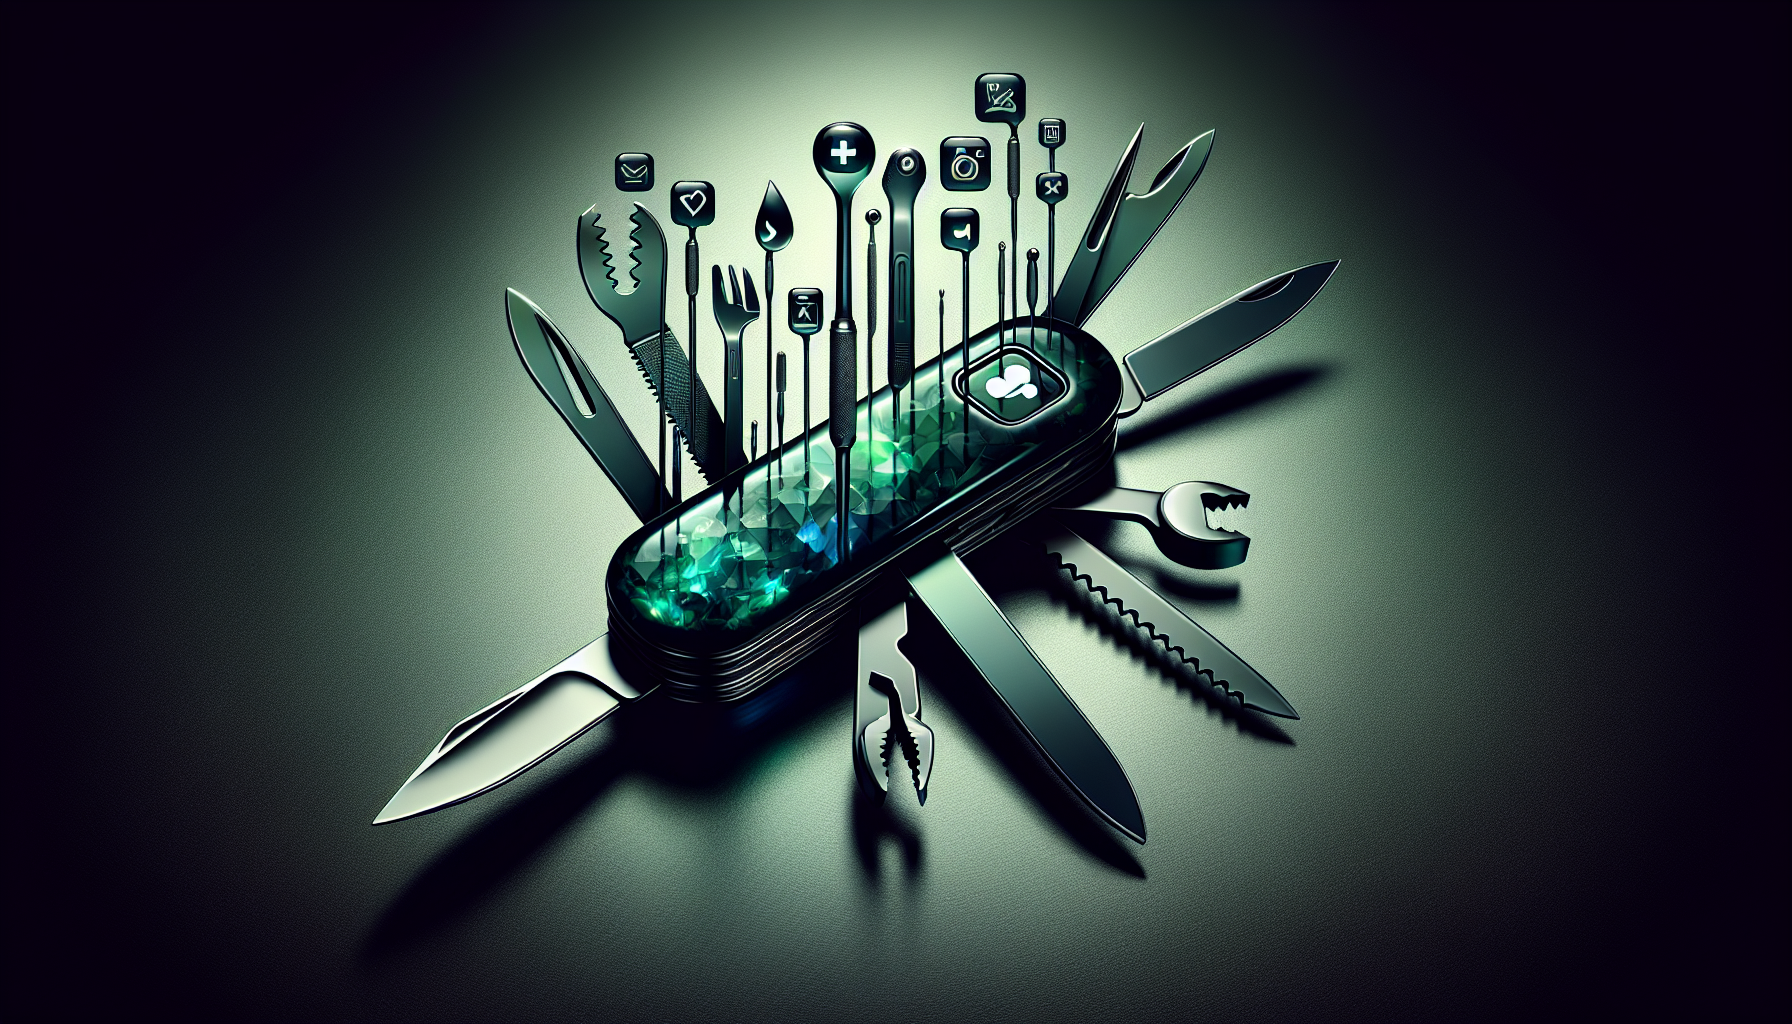 Illustration of a Swiss army knife with social media icons